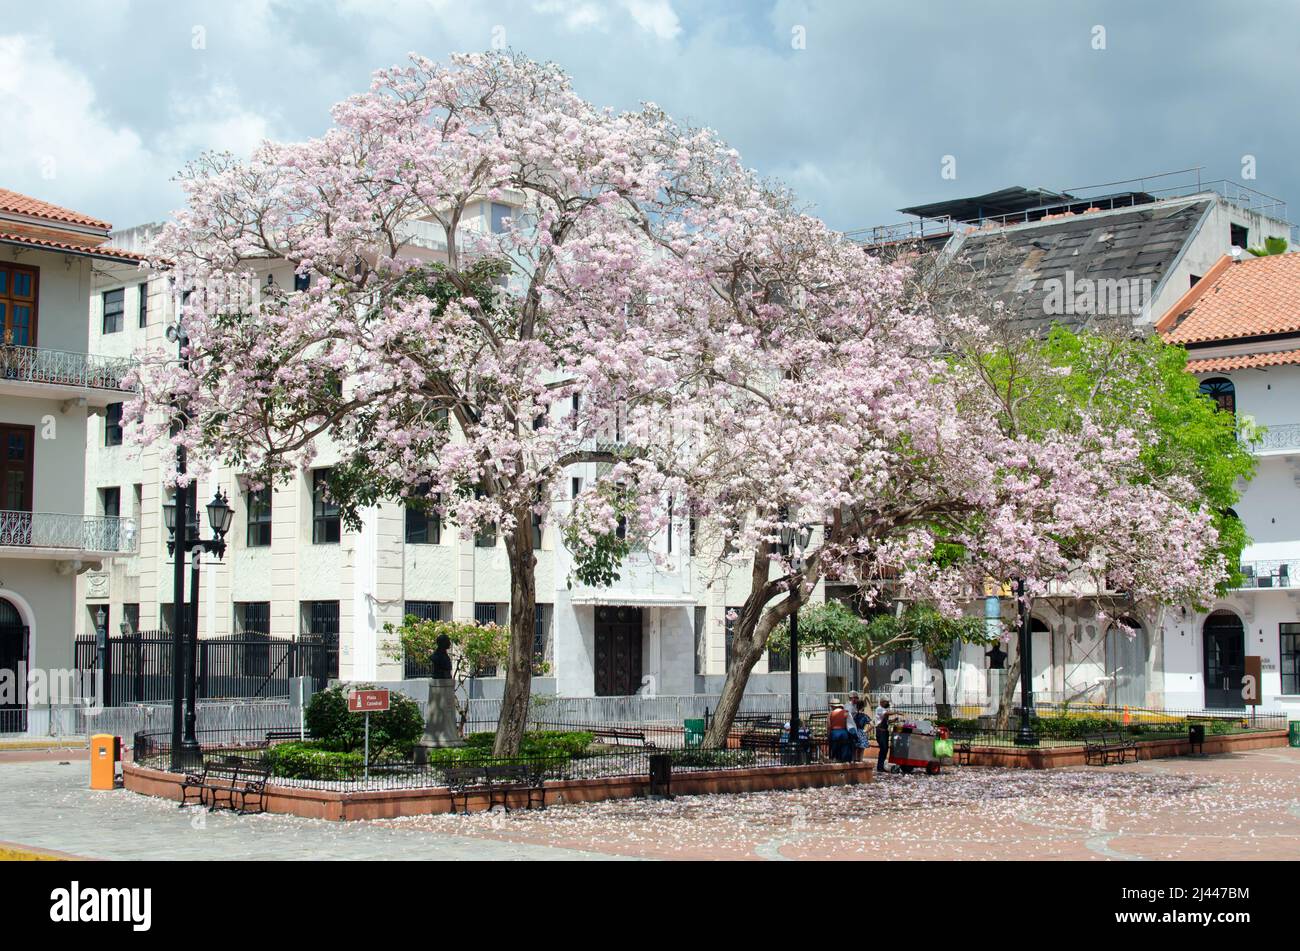 View of the surroundings of Cathedral Plaza with an impressive tree in full bloom Stock Photo